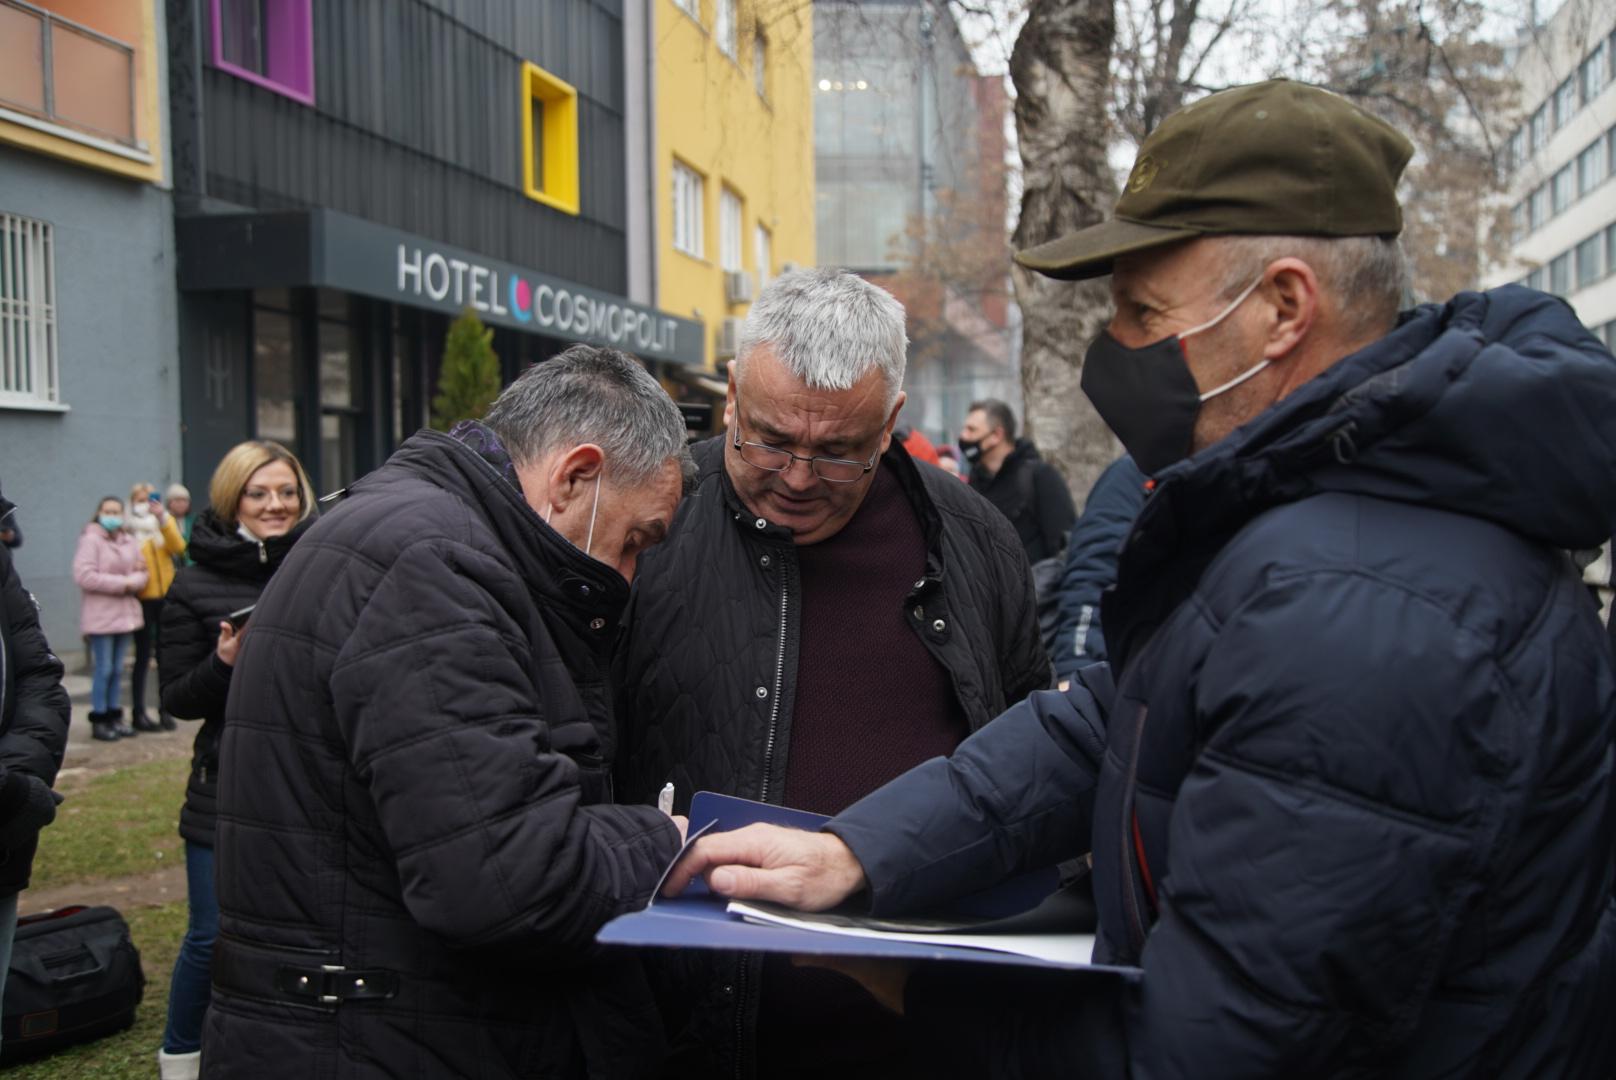 Memić family submits request for dismissal of prosecutor Sarajlija: It will soon be known who Dženan's killer is